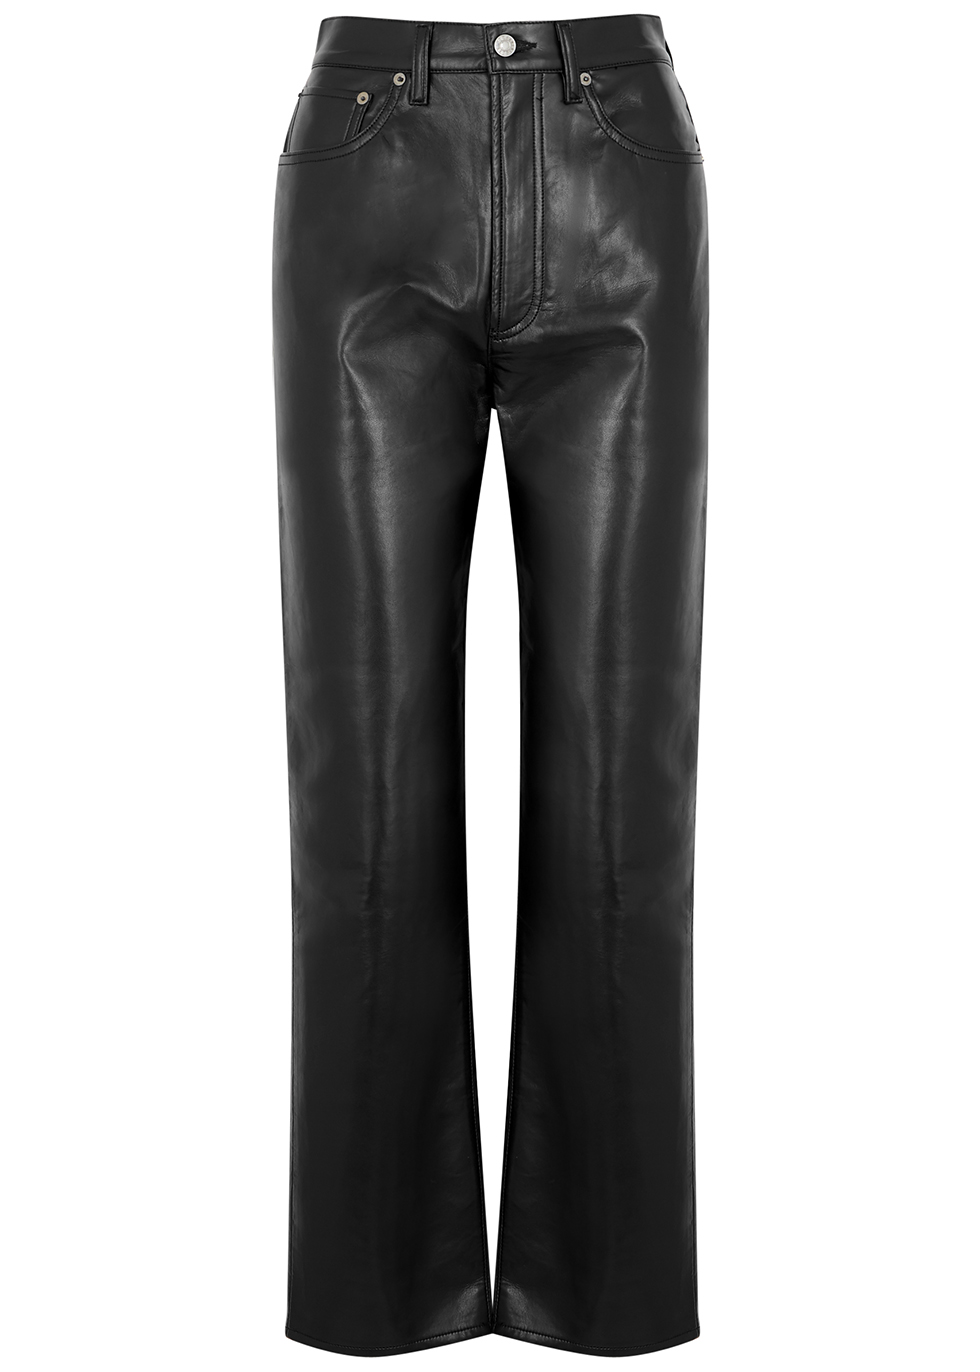 Femme Taille: W25 Leather Trousers Violet Miinto Femme Vêtements Pantalons & Jeans Pantalons Pantalons en cuir 